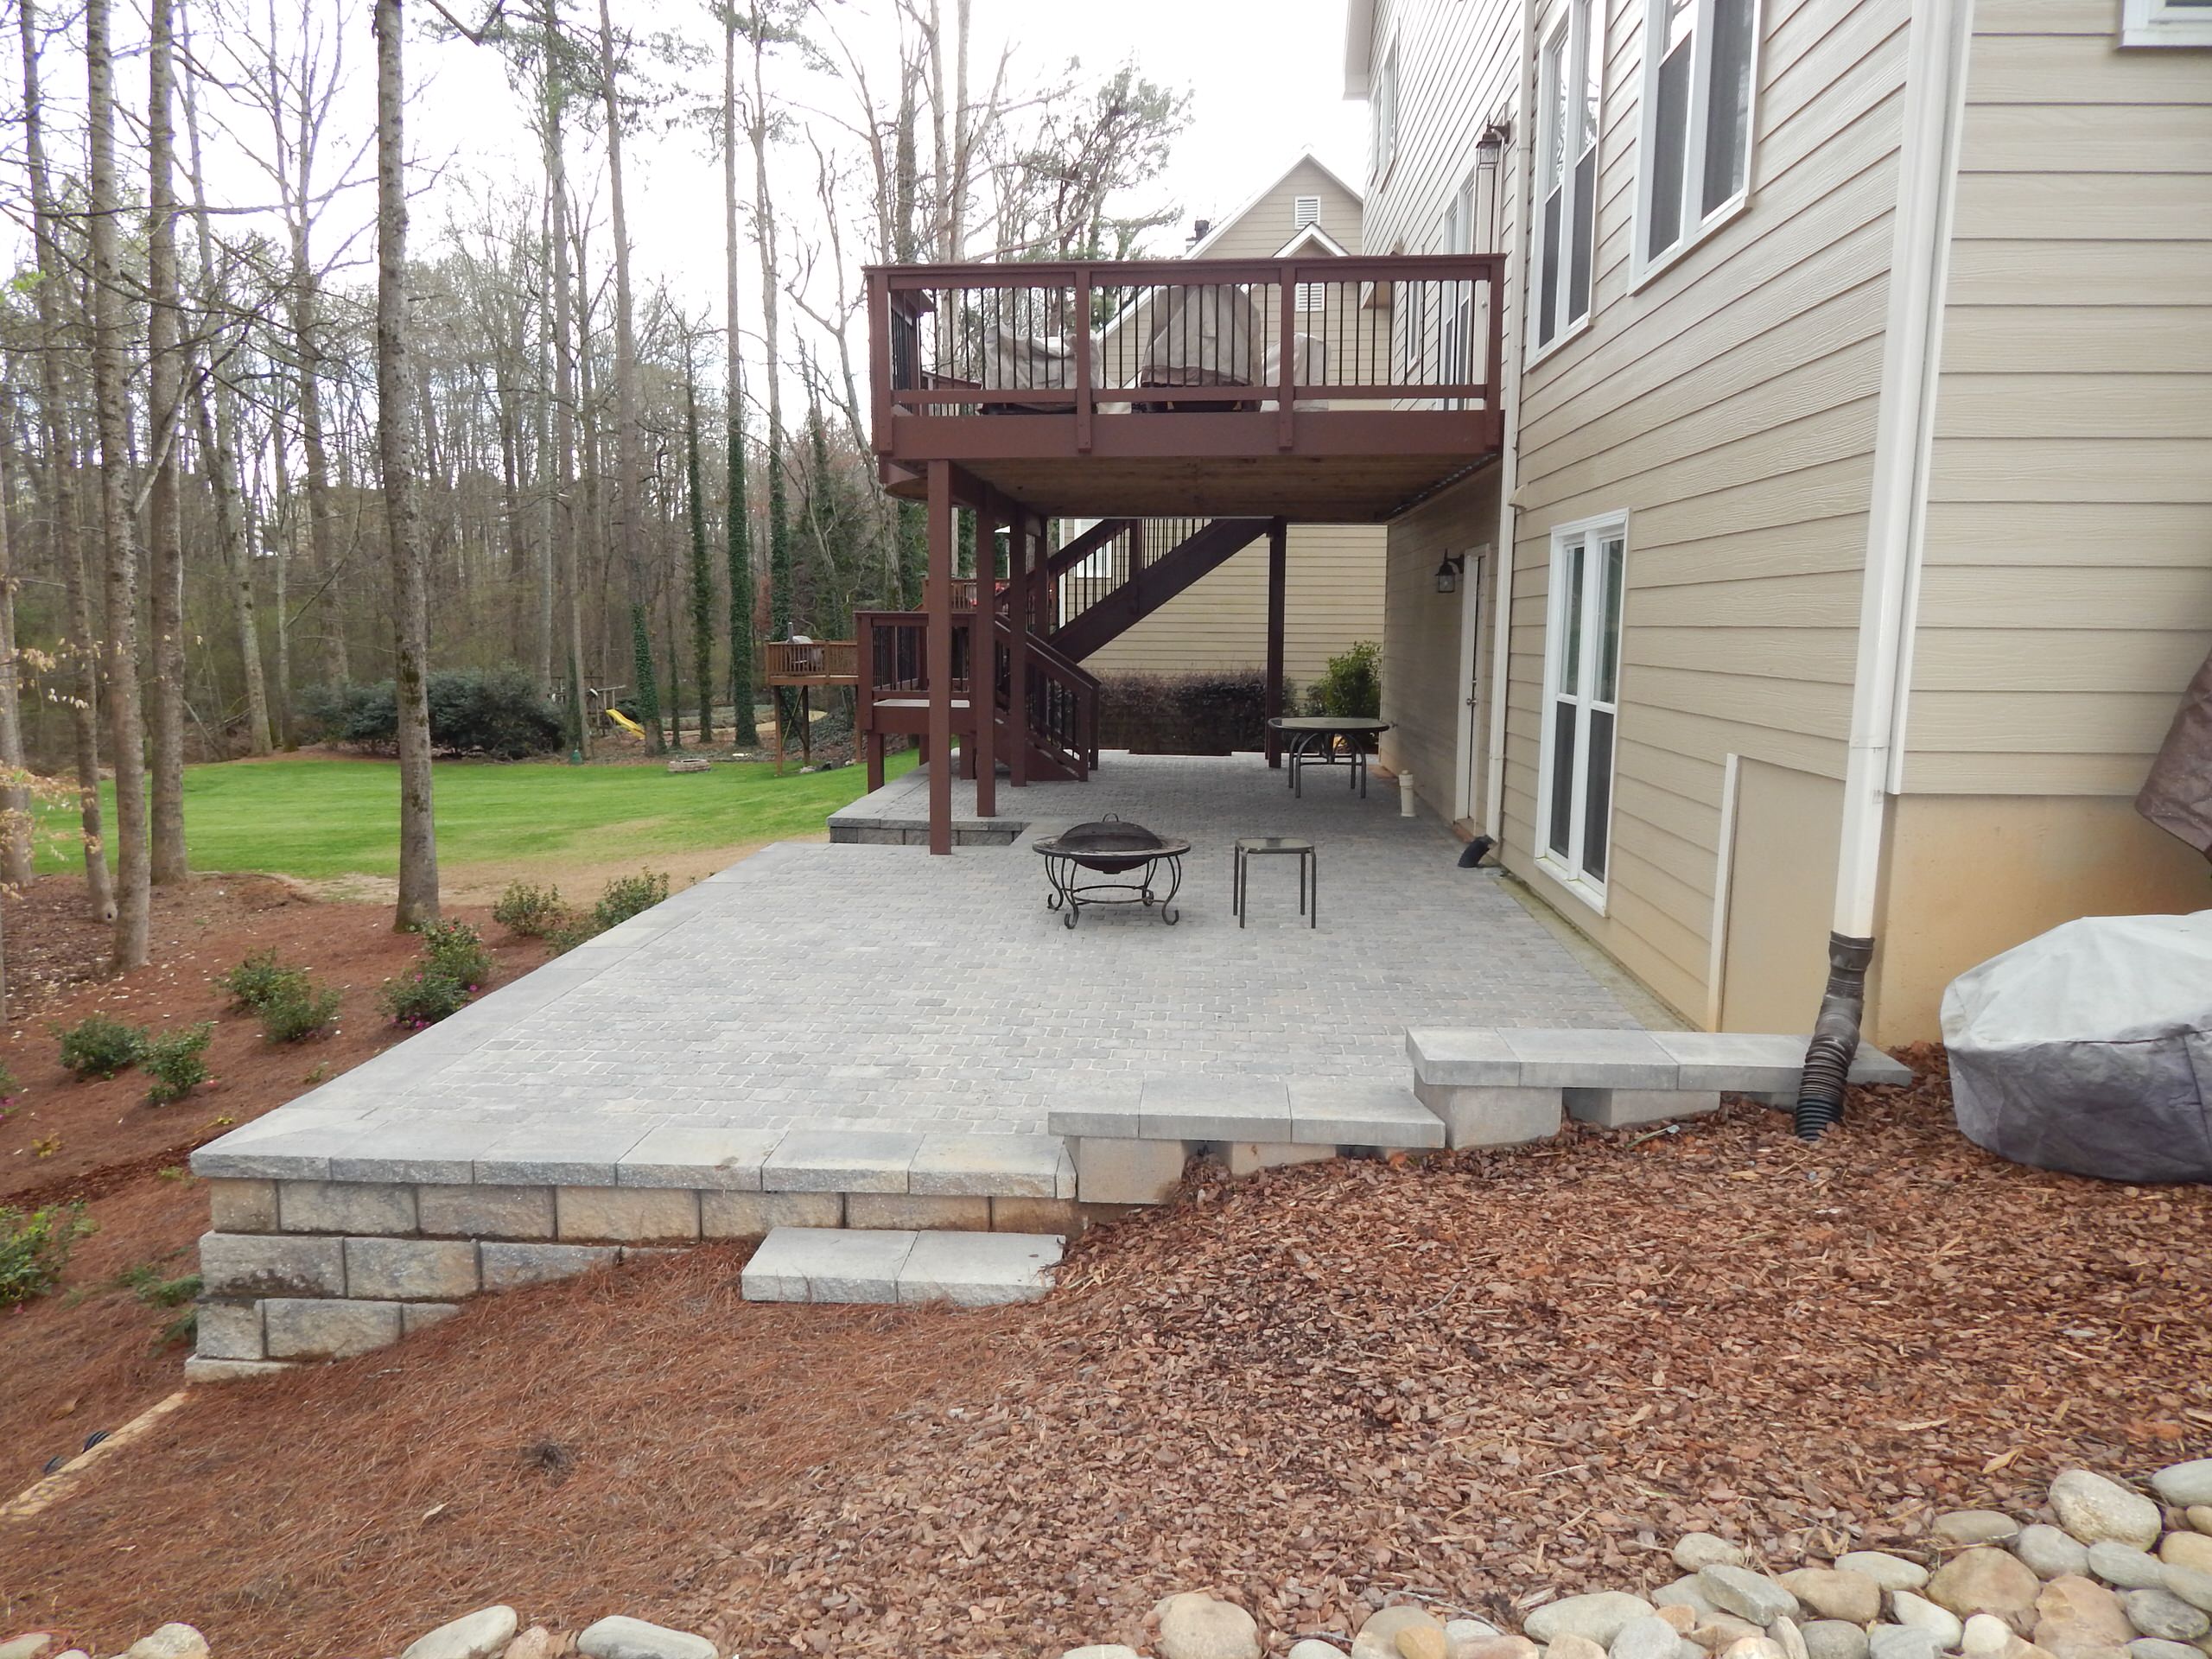 Block wall and tumbled paver patio